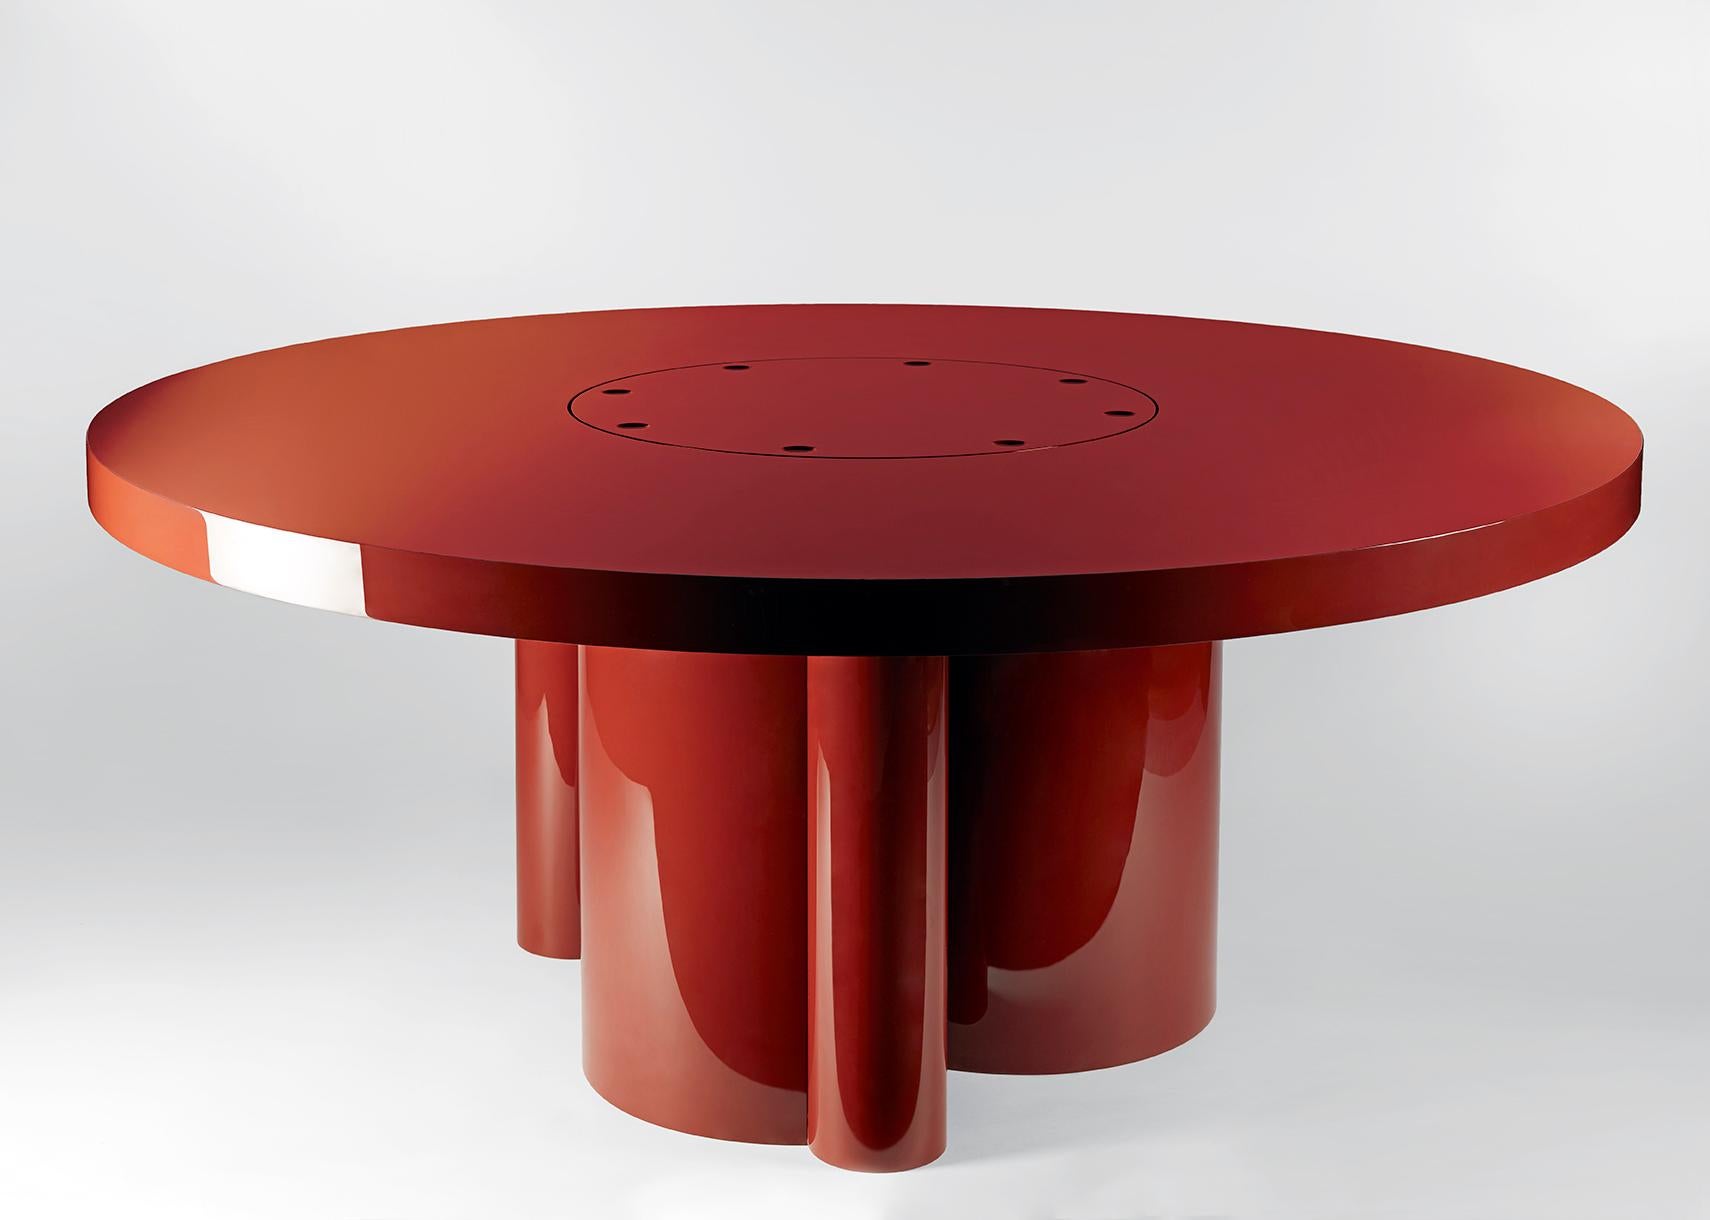 Cherry dining table by Gisbert Pöppler
Dimensions: D 180 x W 180 x H 74 cm
Materials: red lacquered aluminum

The refreshing red is not the origin of this dining table’s name, but rather the playful form of its base! Shaped like cherries with curved